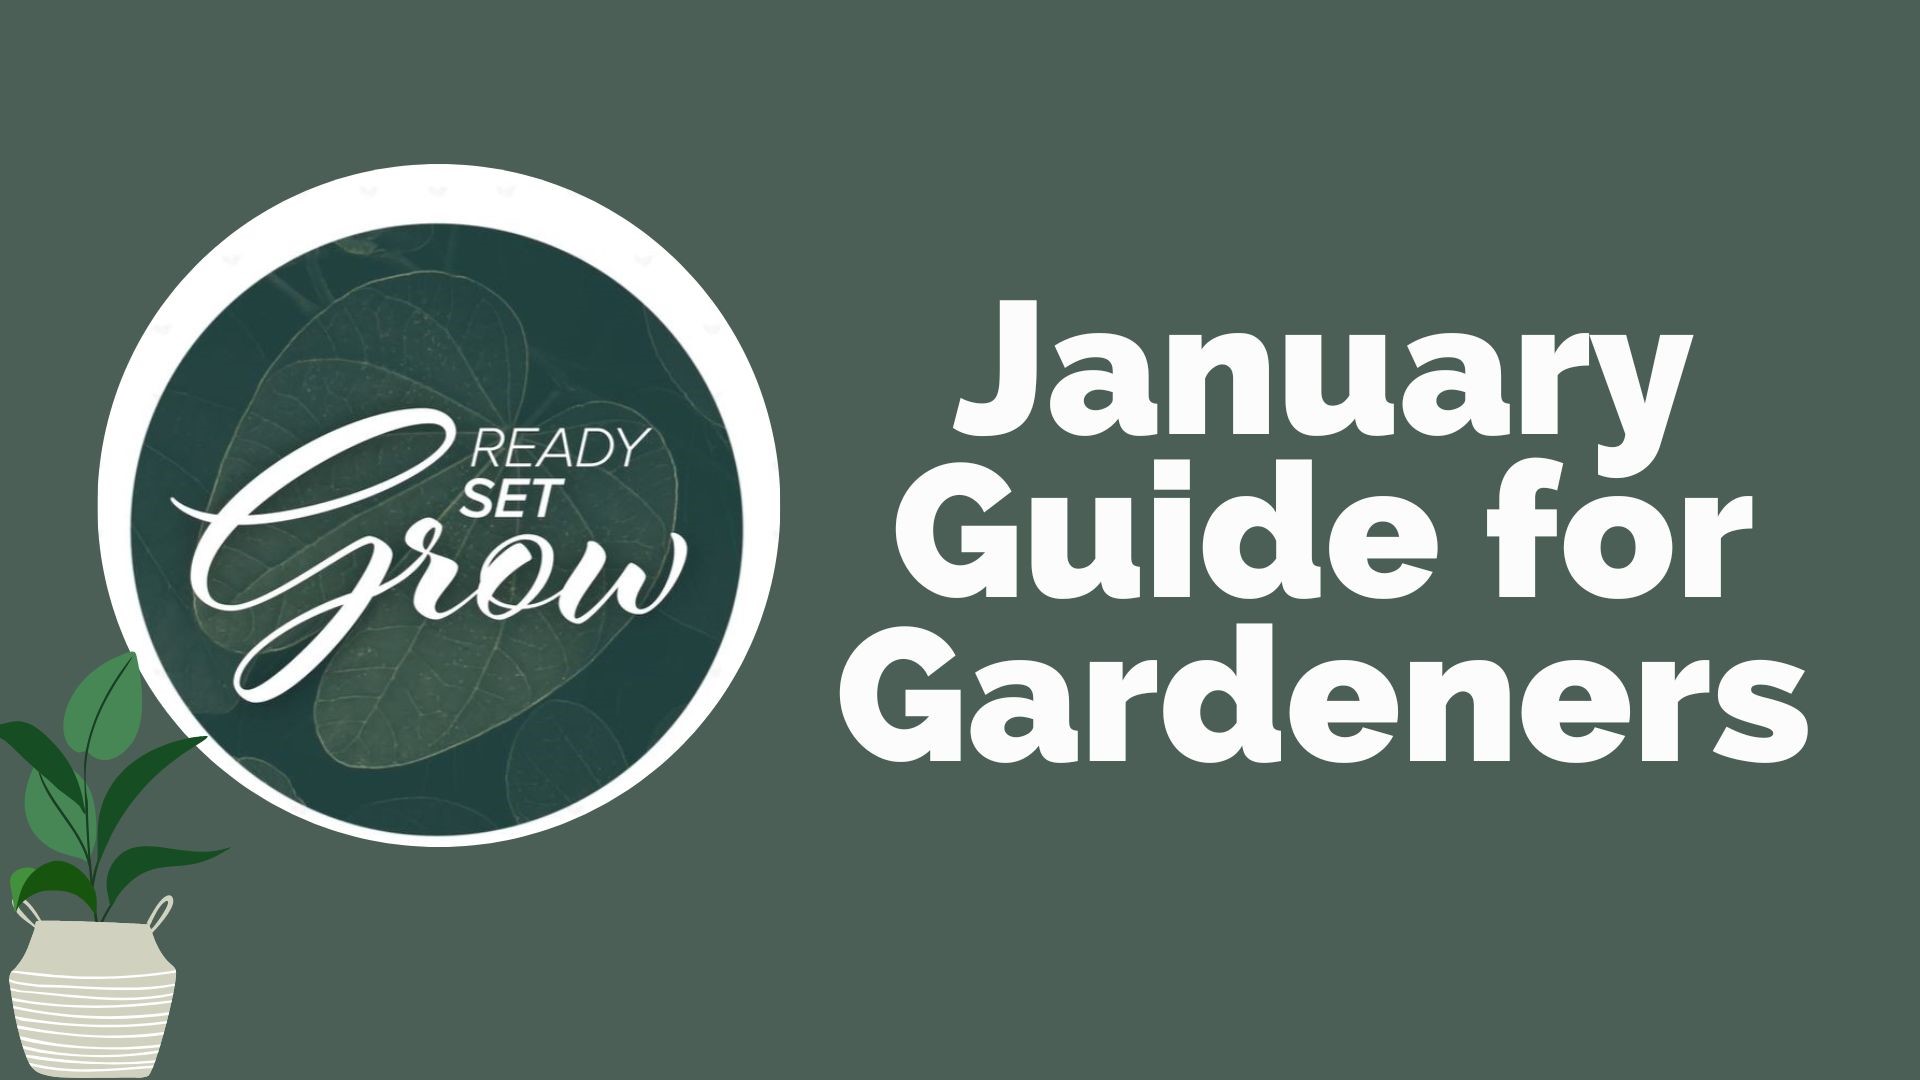 January is not an exciting time for gardeners itching to be outside, but we have a look at the activities to be done indoors. Plus how to protect plants in the cold.